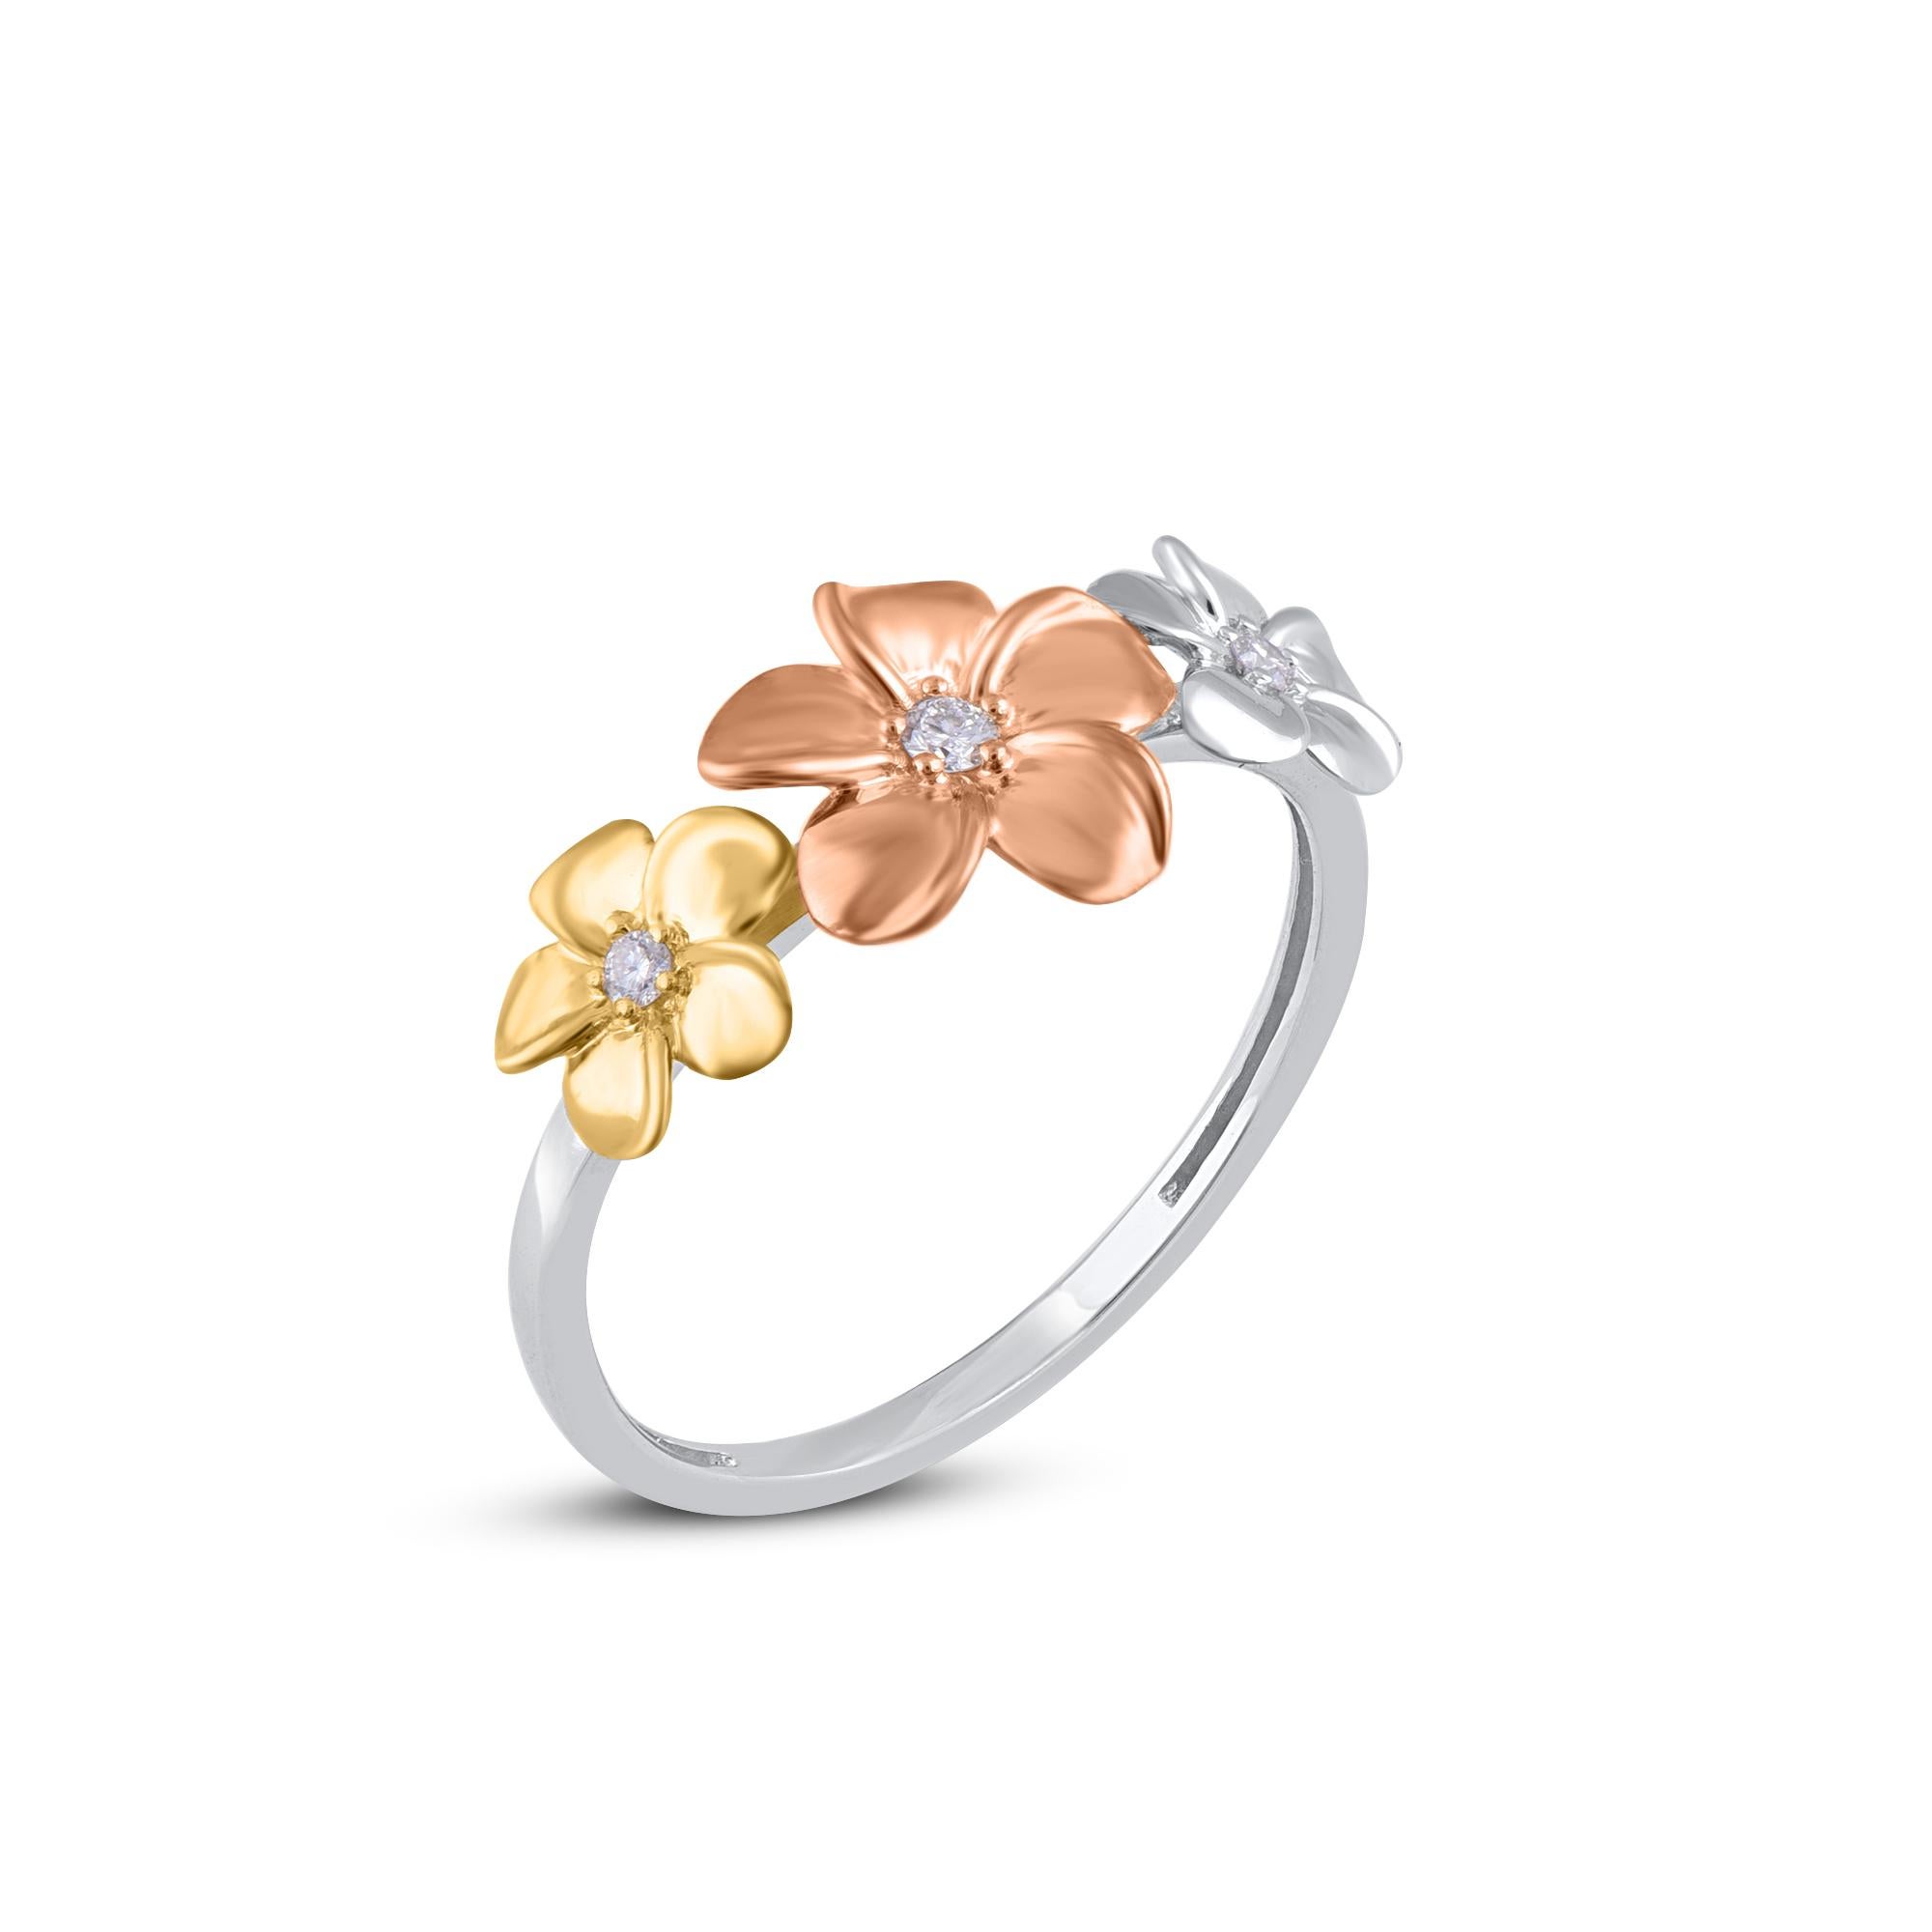 Put a spring into your style with this striking diamond three flower ring. Crafted in 14KT tri-color gold and studded with 3 brilliant-cut diamonds in prong setting, diamonds are graded H-I Color, I2 Clarity. Ring size is US size 7 and can be